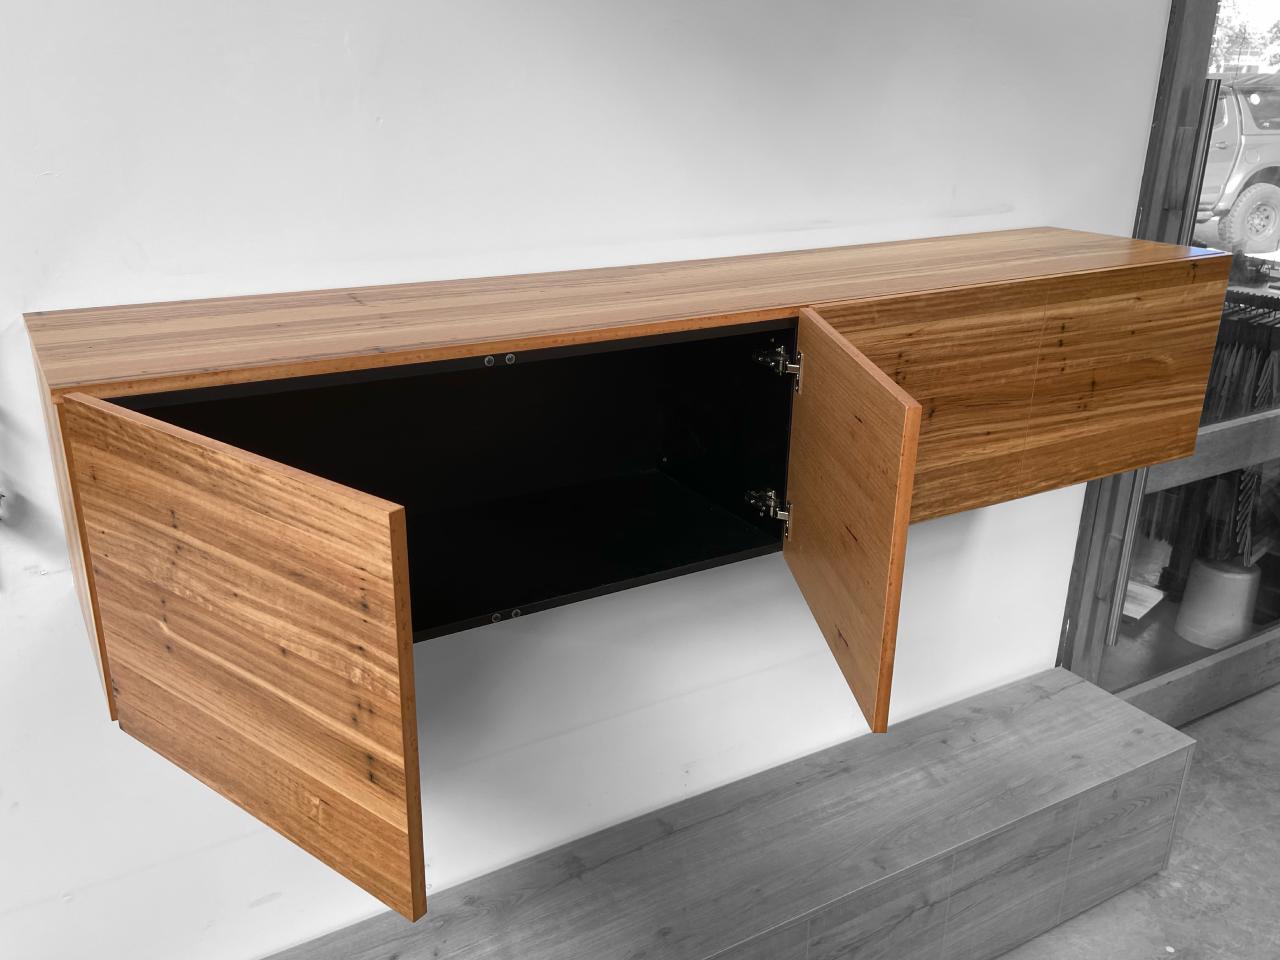 Levi Media Entertainment Unit 4 Door Blackbutt Timber Quality Furniture Made in Adelaide, South Australia